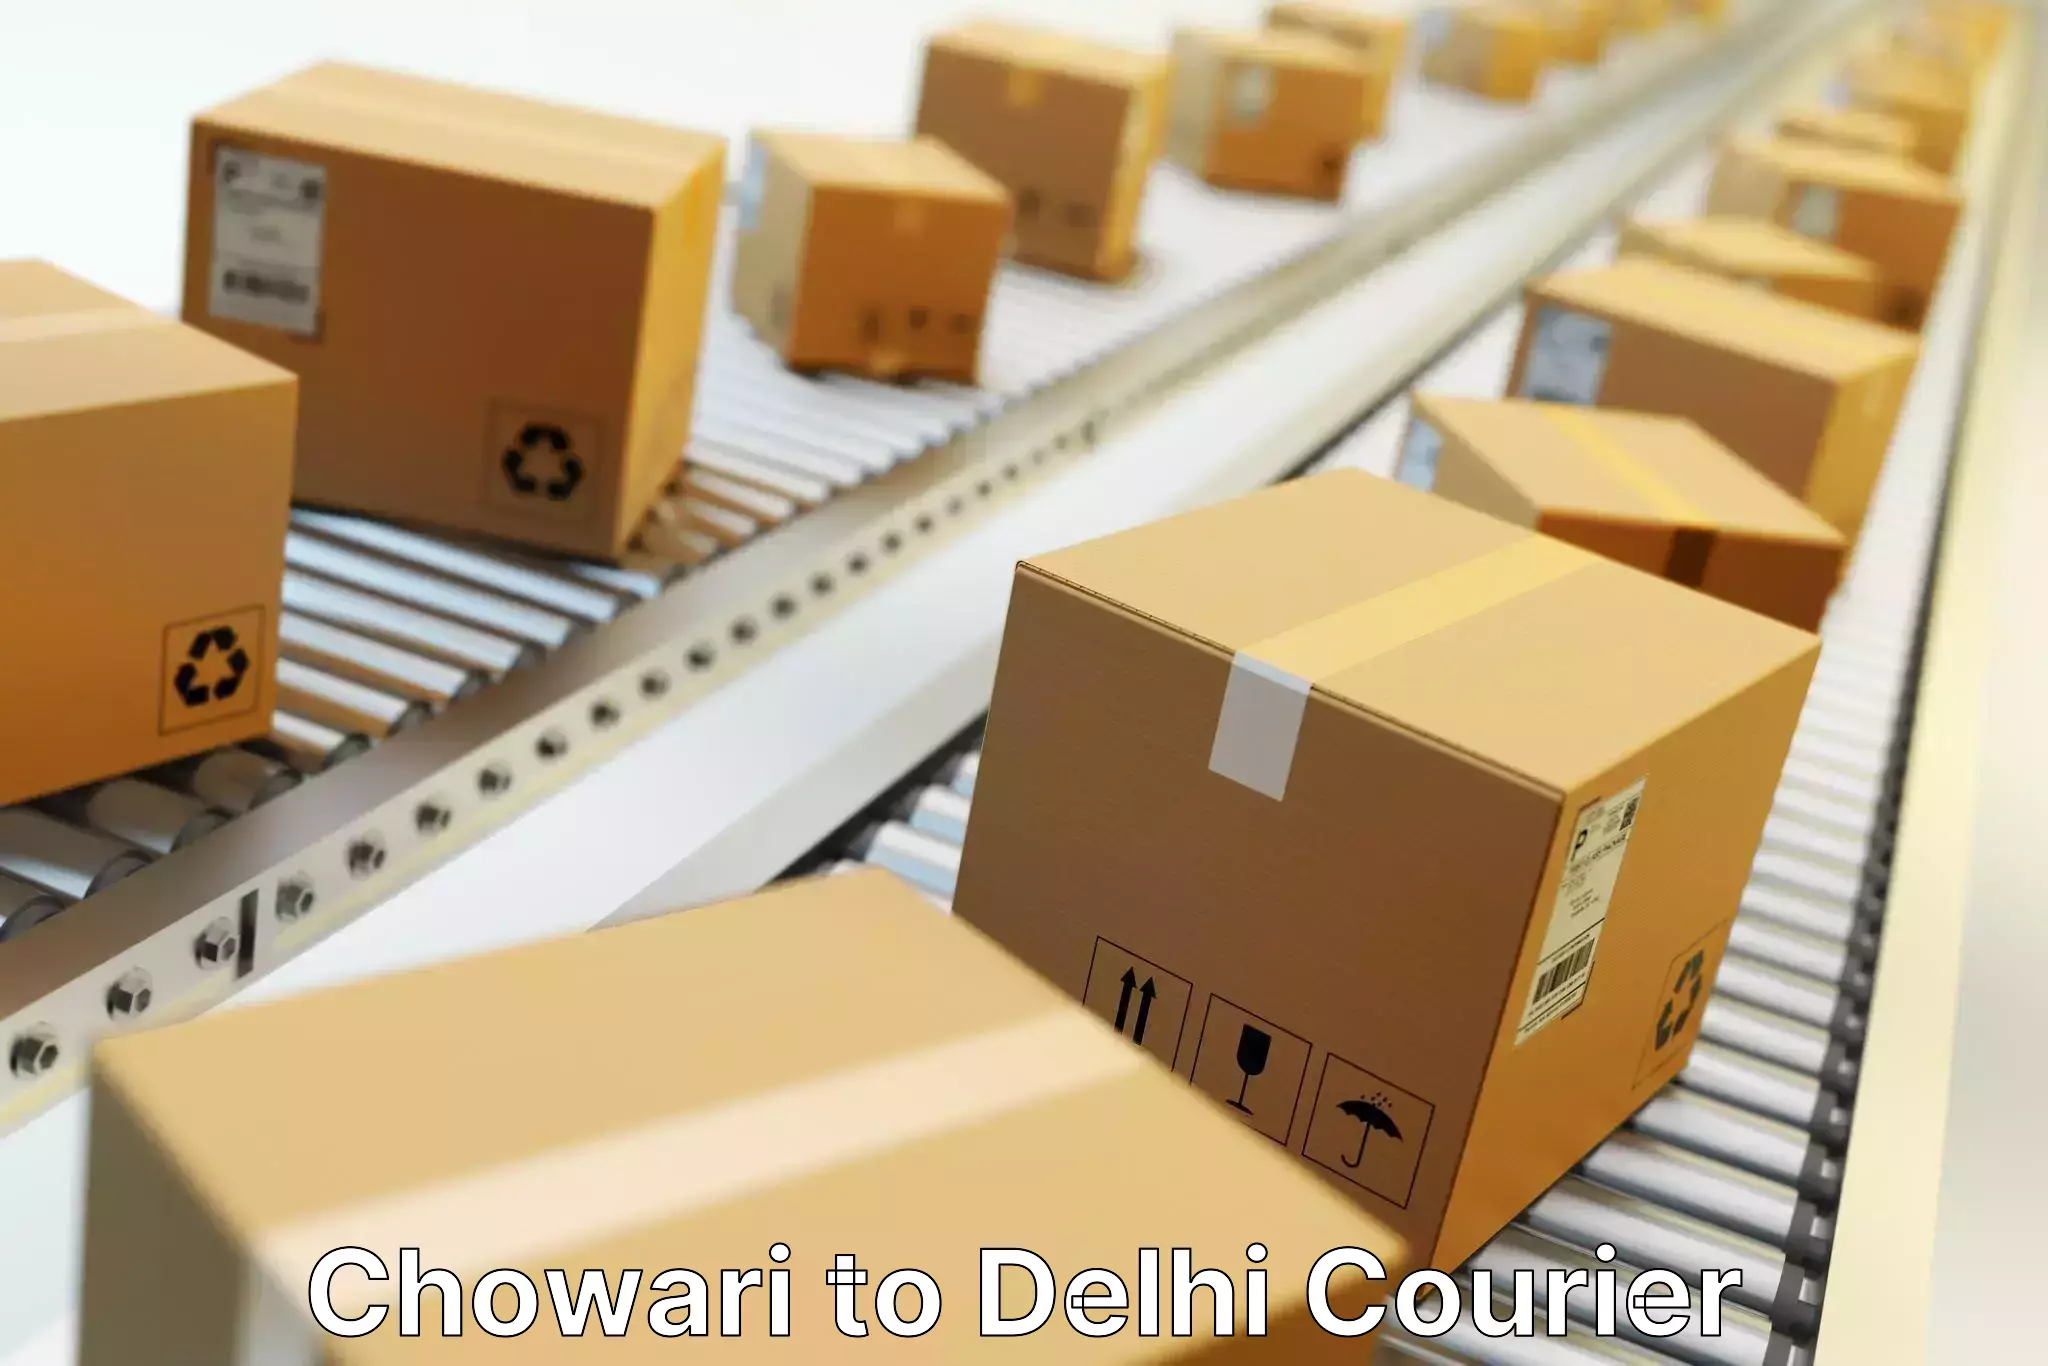 Nationwide courier service Chowari to Delhi